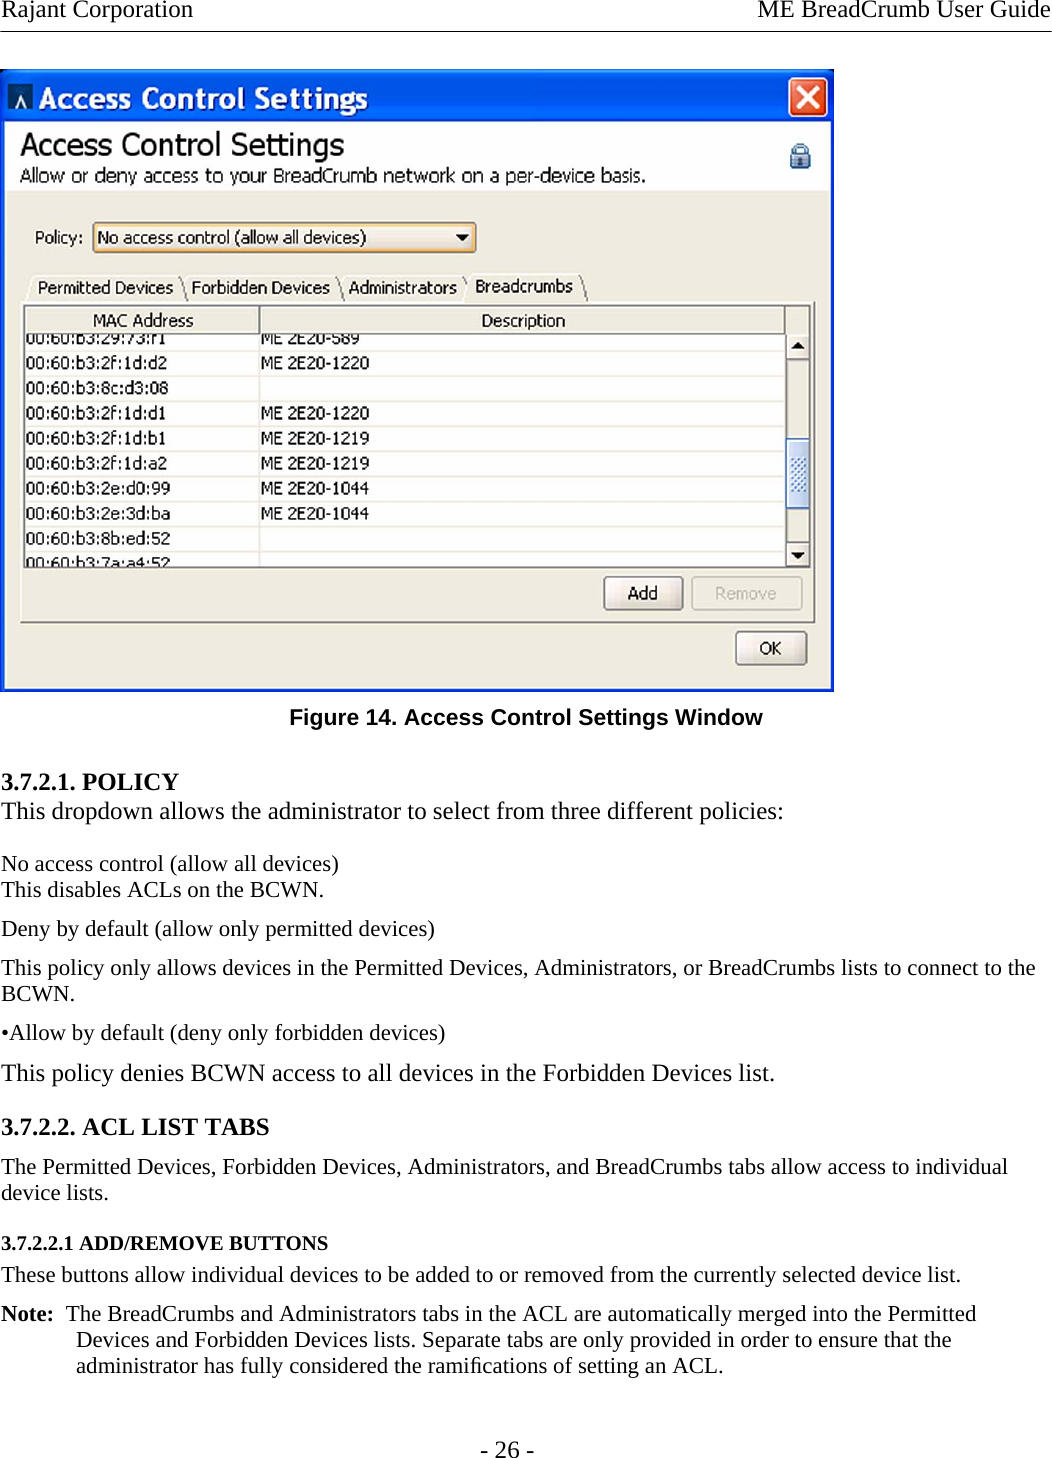 Rajant Corporation    ME BreadCrumb User Guide   Figure 14. Access Control Settings Window 3.7.2.1. POLICY This dropdown allows the administrator to select from three different policies: No access control (allow all devices) This disables ACLs on the BCWN. Deny by default (allow only permitted devices)  This policy only allows devices in the Permitted Devices, Administrators, or BreadCrumbs lists to connect to the BCWN.  •Allow by default (deny only forbidden devices) This policy denies BCWN access to all devices in the Forbidden Devices list. 3.7.2.2. ACL LIST TABS  The Permitted Devices, Forbidden Devices, Administrators, and BreadCrumbs tabs allow access to individual device lists.  3.7.2.2.1 ADD/REMOVE BUTTONS  These buttons allow individual devices to be added to or removed from the currently selected device list.  Note:  The BreadCrumbs and Administrators tabs in the ACL are automatically merged into the Permitted Devices and Forbidden Devices lists. Separate tabs are only provided in order to ensure that the administrator has fully considered the ramiﬁcations of setting an ACL.  - 26 - 